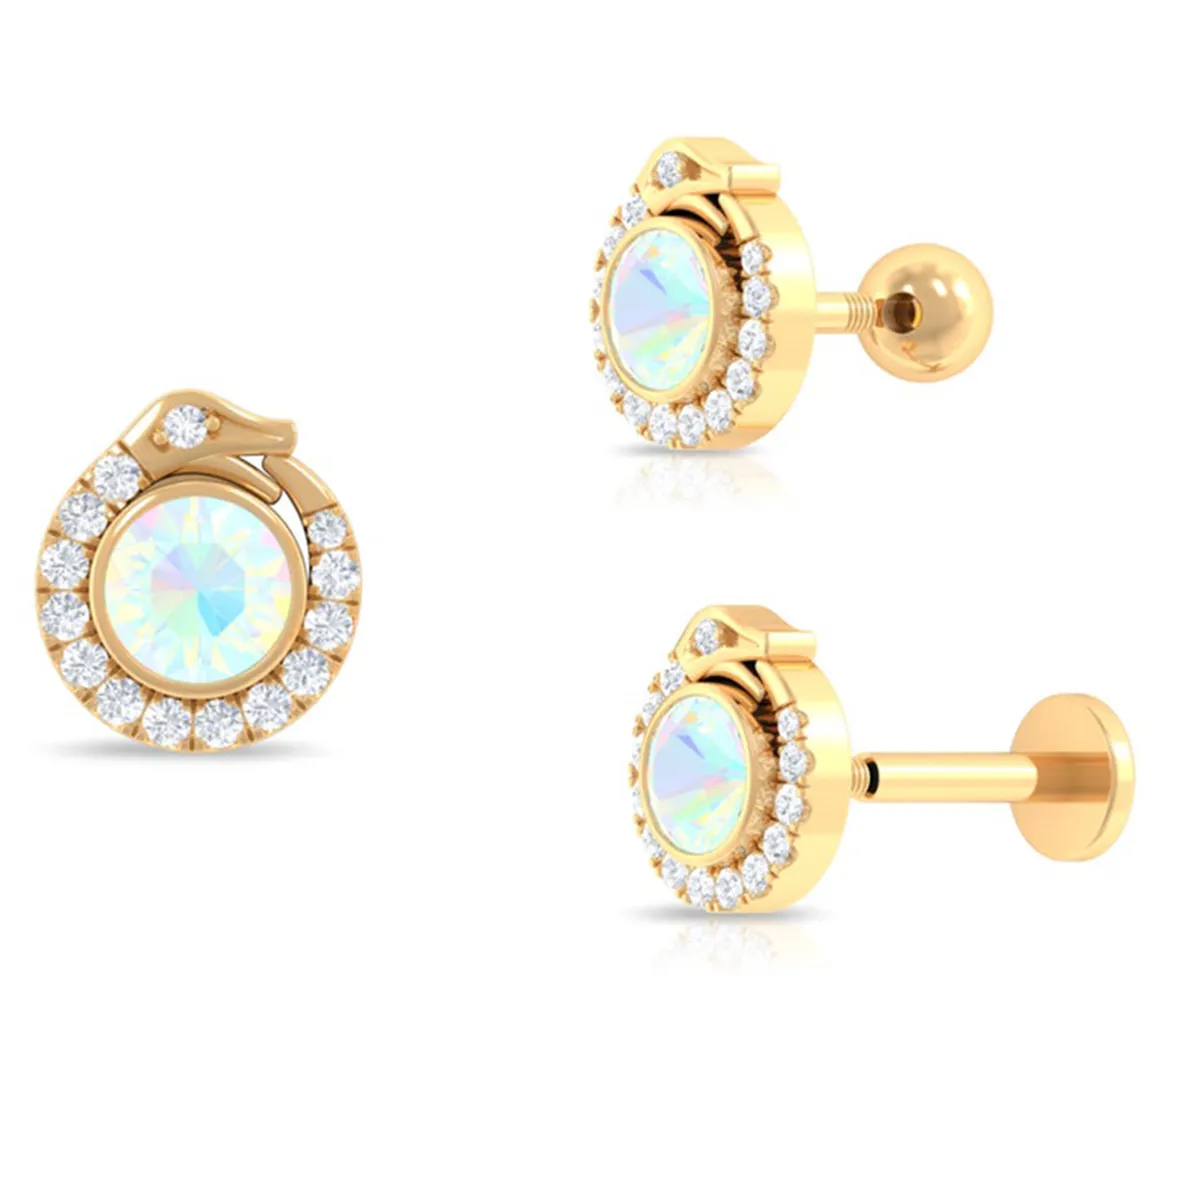 Vintage S925 18K Rose Gold Plated White CZ Jewelry Opal Stone Jewelry Fine Quality Design Factory Earring